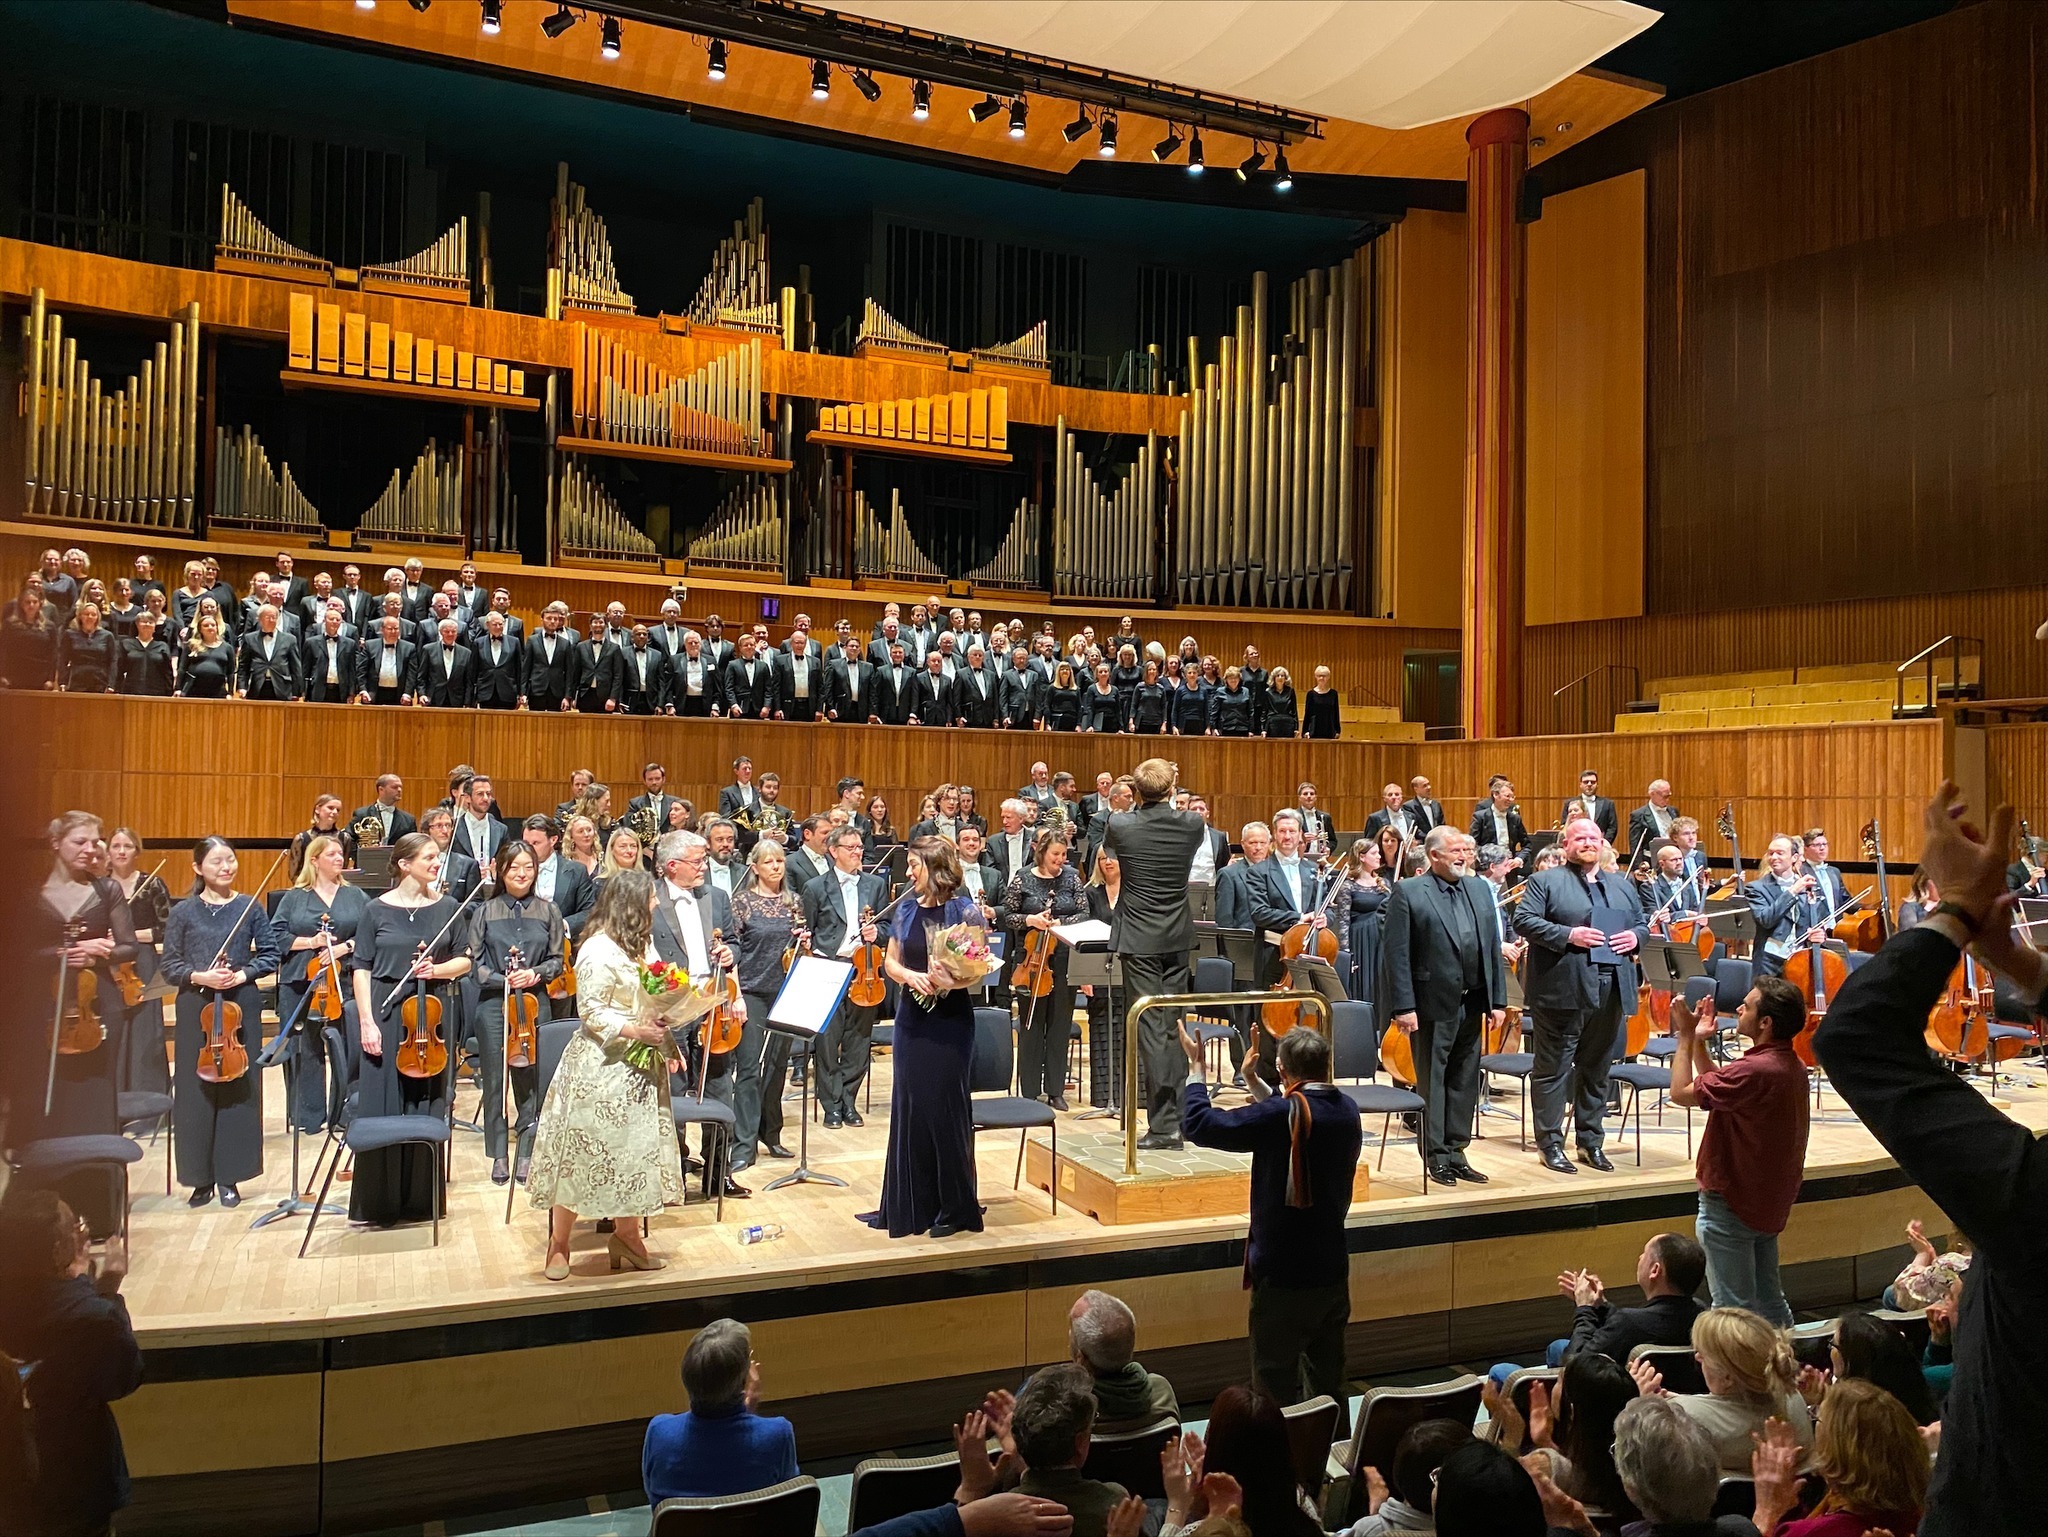 The RPO and Philharmonia Chorus reciving applause on stage at the Royal Festival Hall.